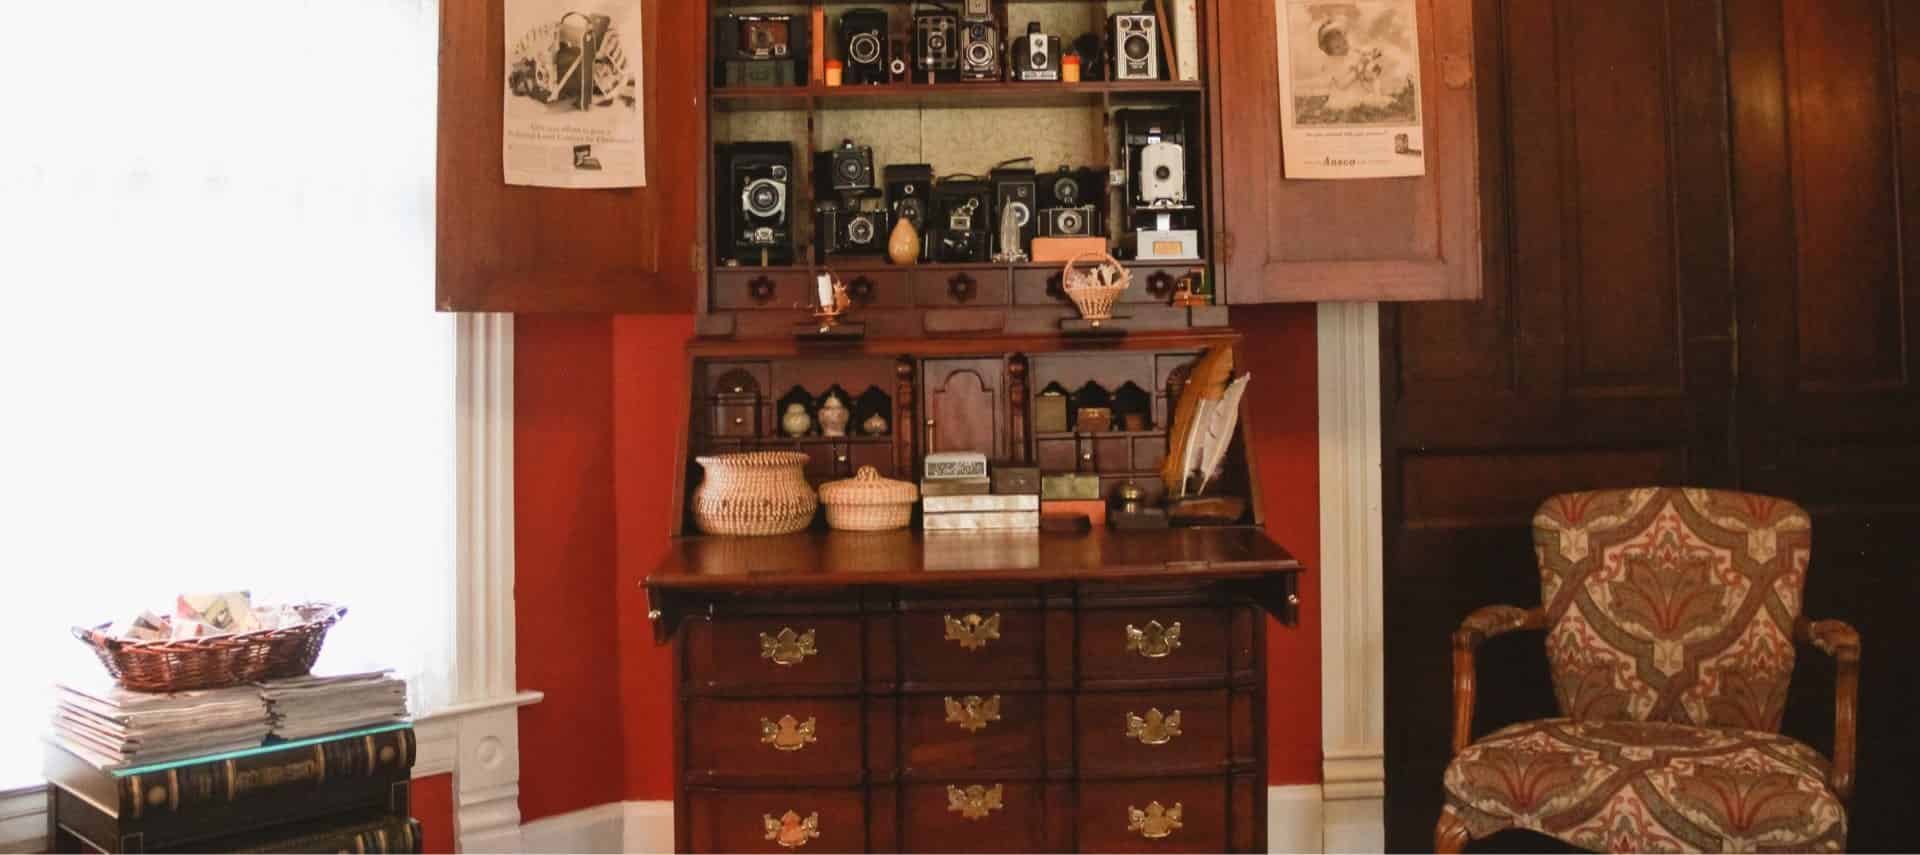 Antique dark wooden desk with hutch on top filled with antique cameras